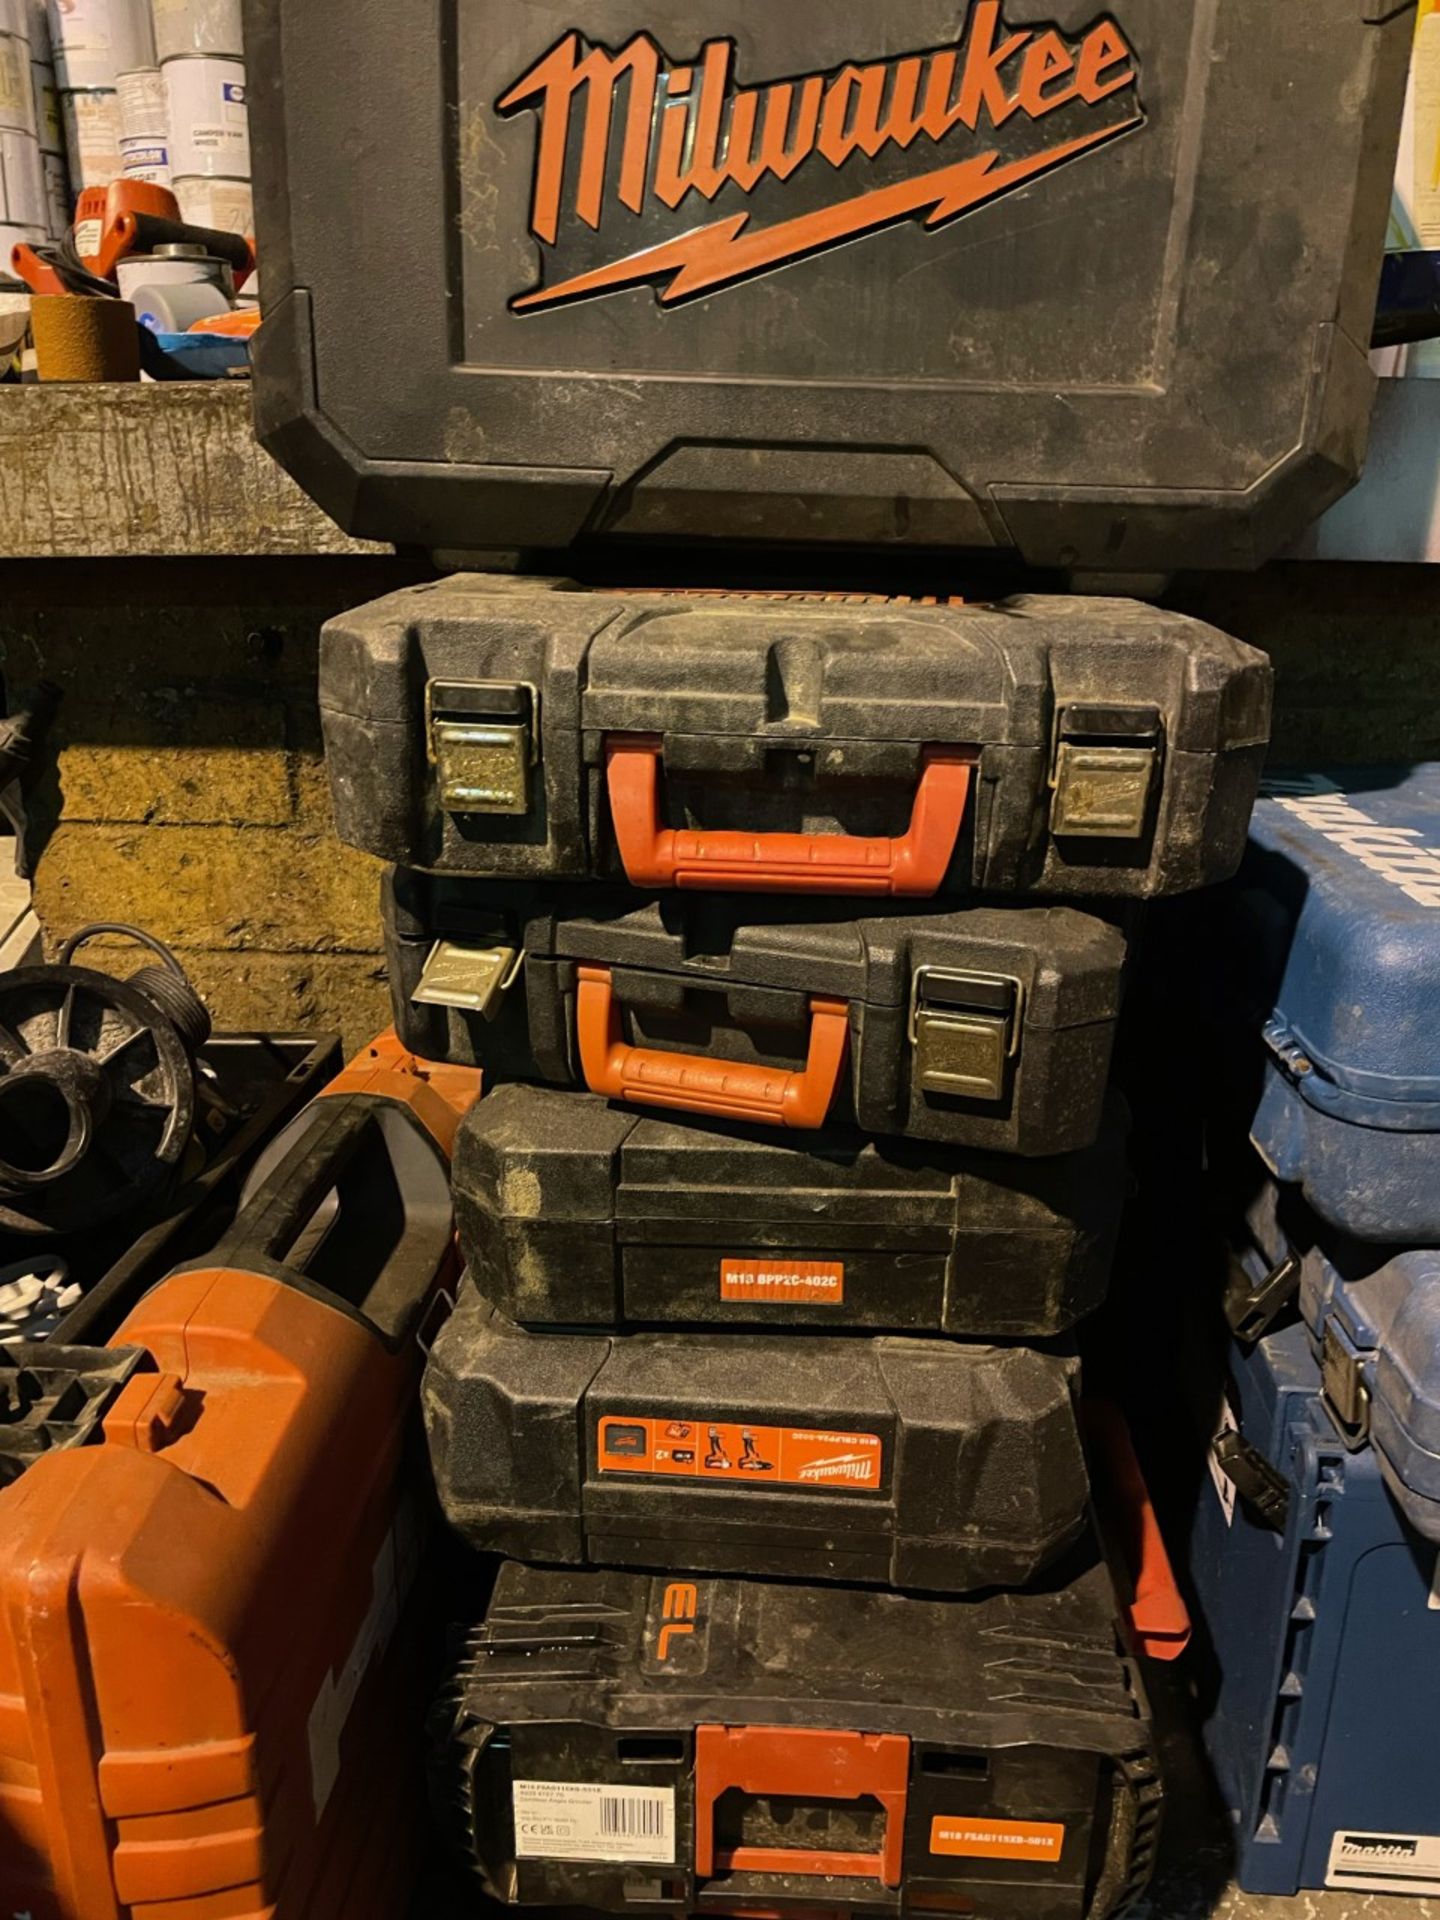 Job lot of 7 milwaukee power tool boxes. No tools are included in this item